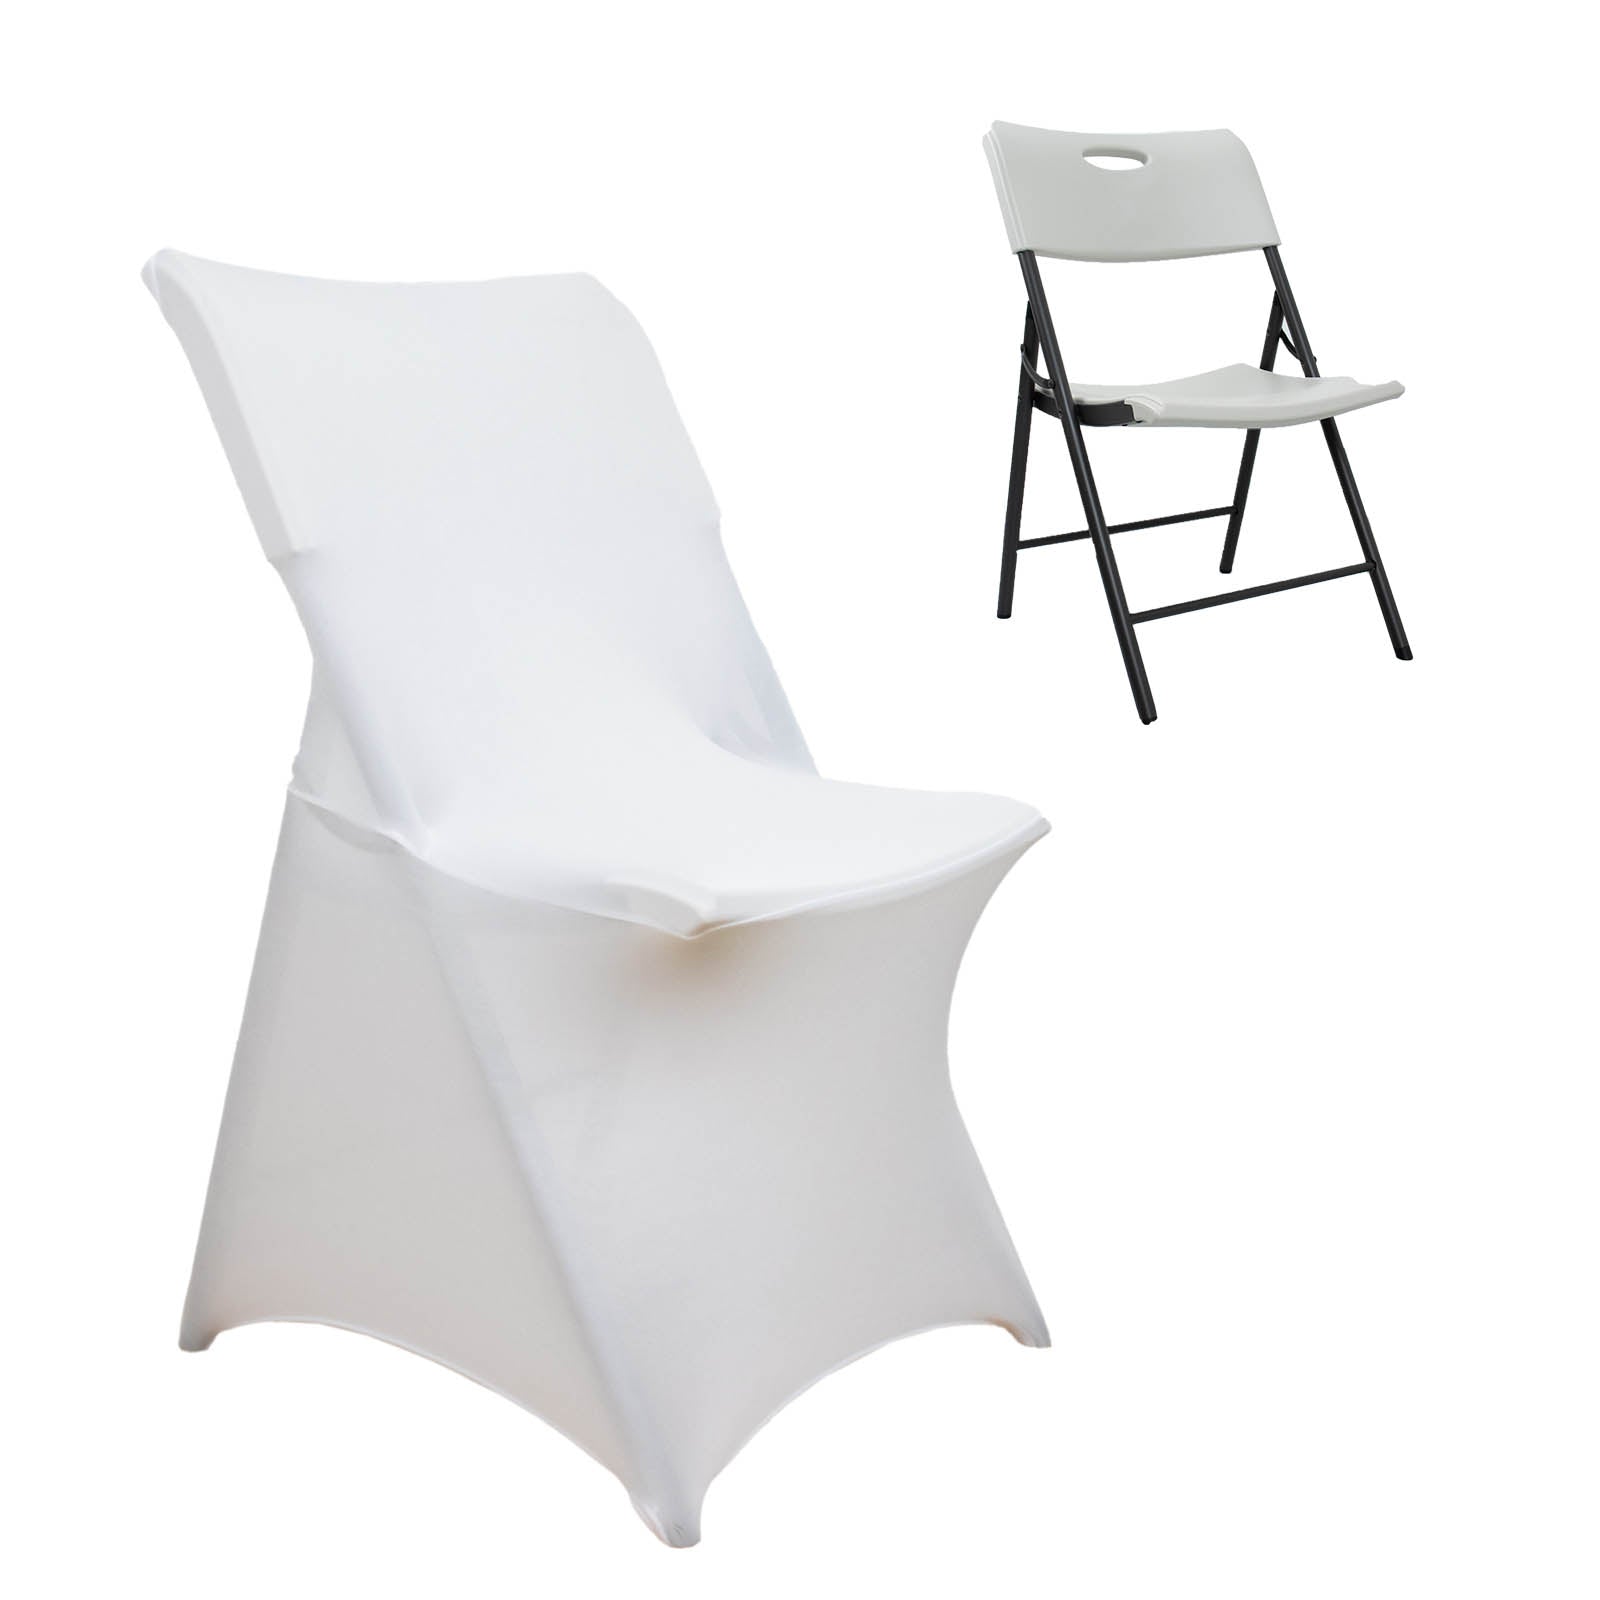 YOUR CHAIR COVERS - Spandex Lifetime Folding Chair Cover - White, Stretch  Fitted Lifetime Folding Chair Seat Cushion Cover, Removable Washable